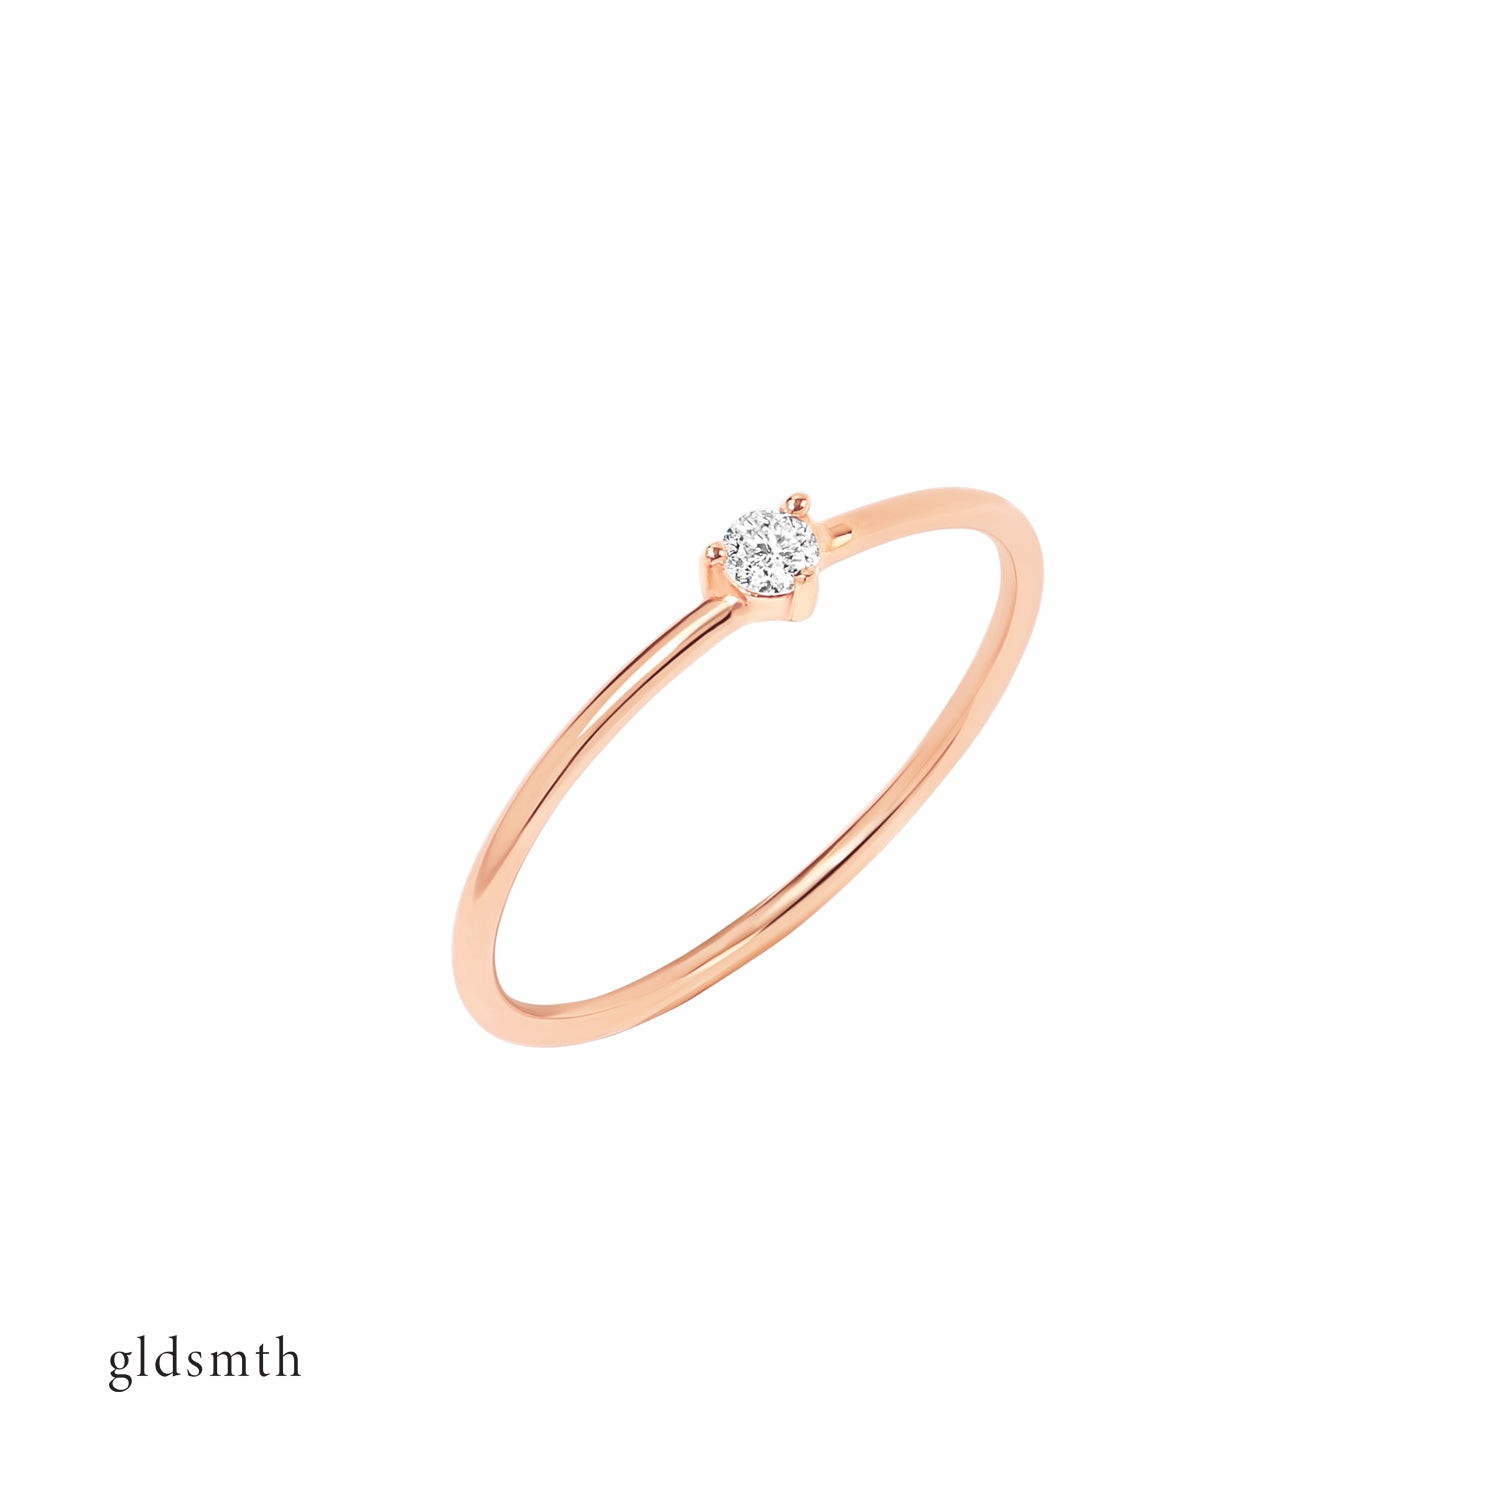 Classic and luxurious ring. Handcrafted 14k solid rose gold ring with conflict free diamond